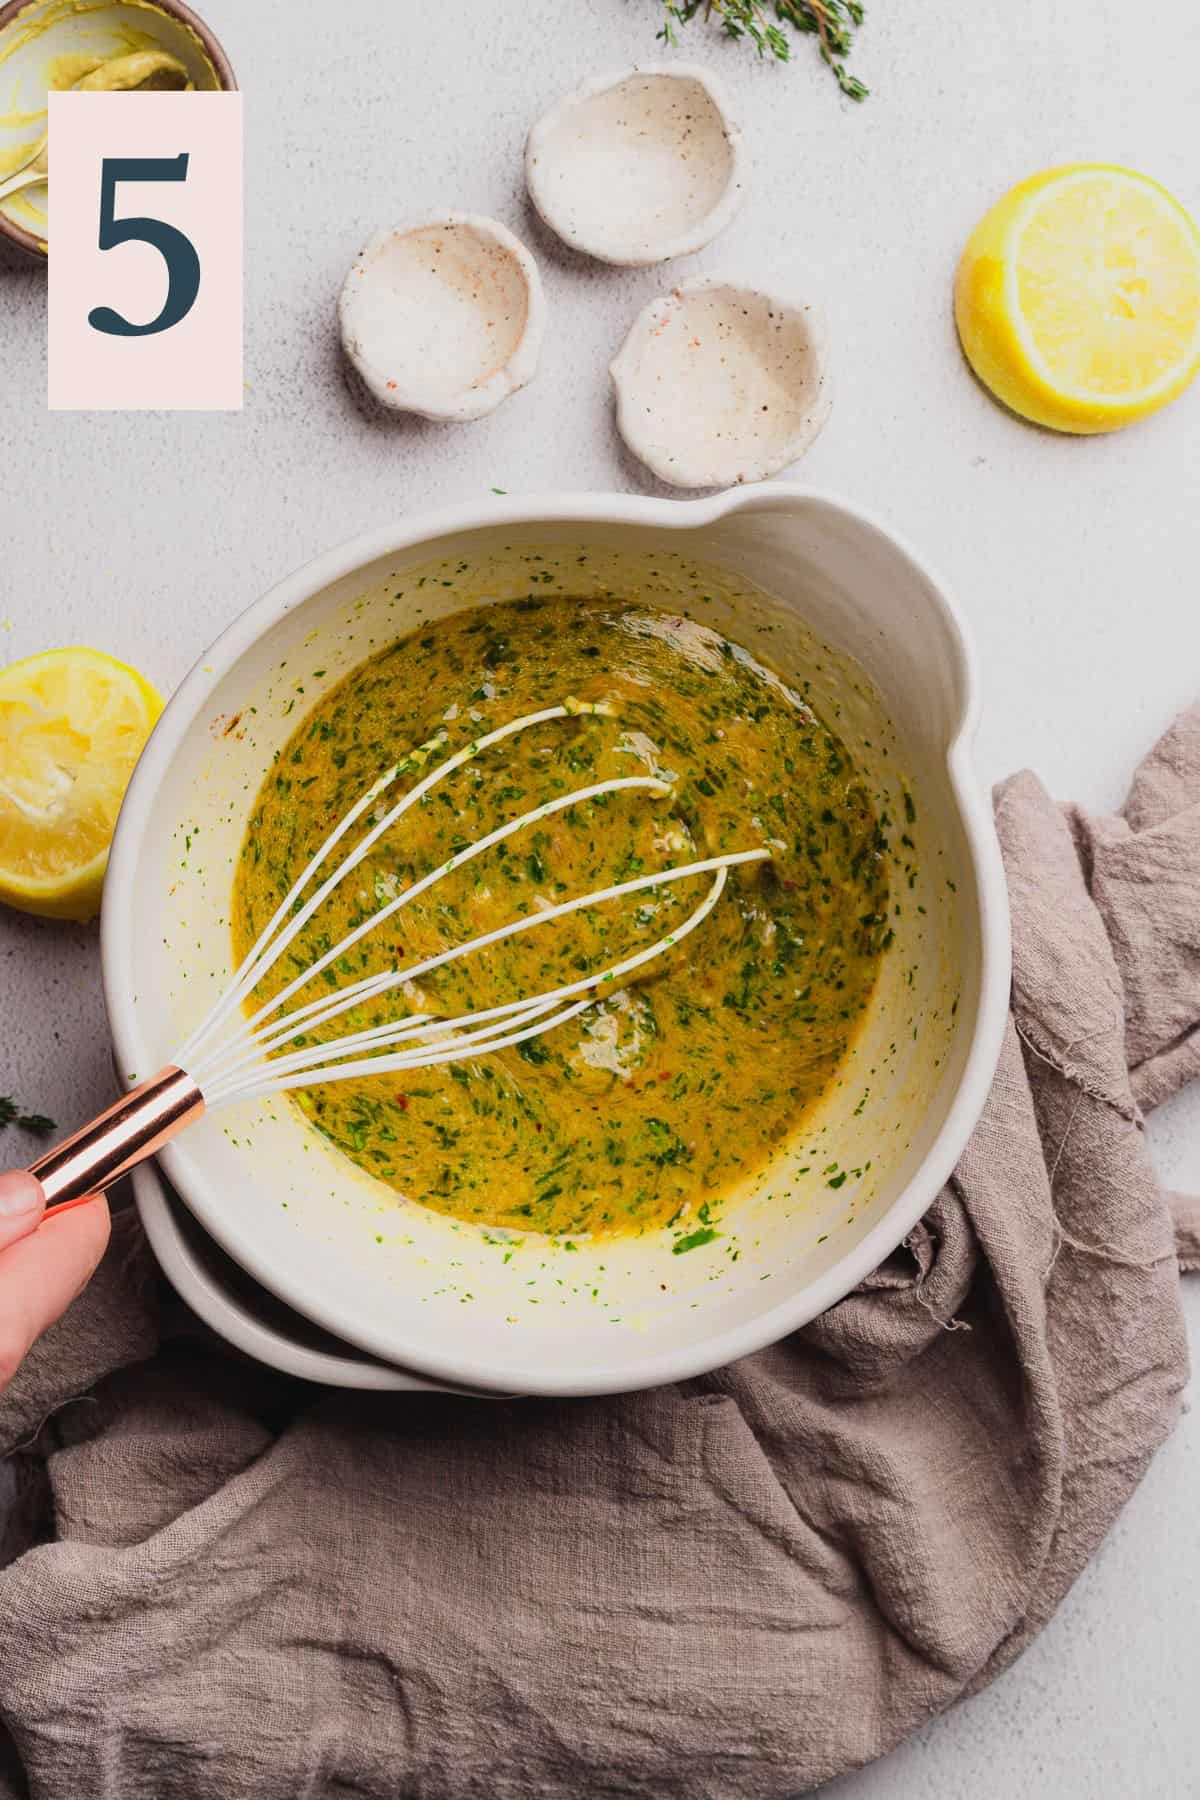 whisking together melted butter with herbs, lemon, spices, shallots, and garlic.